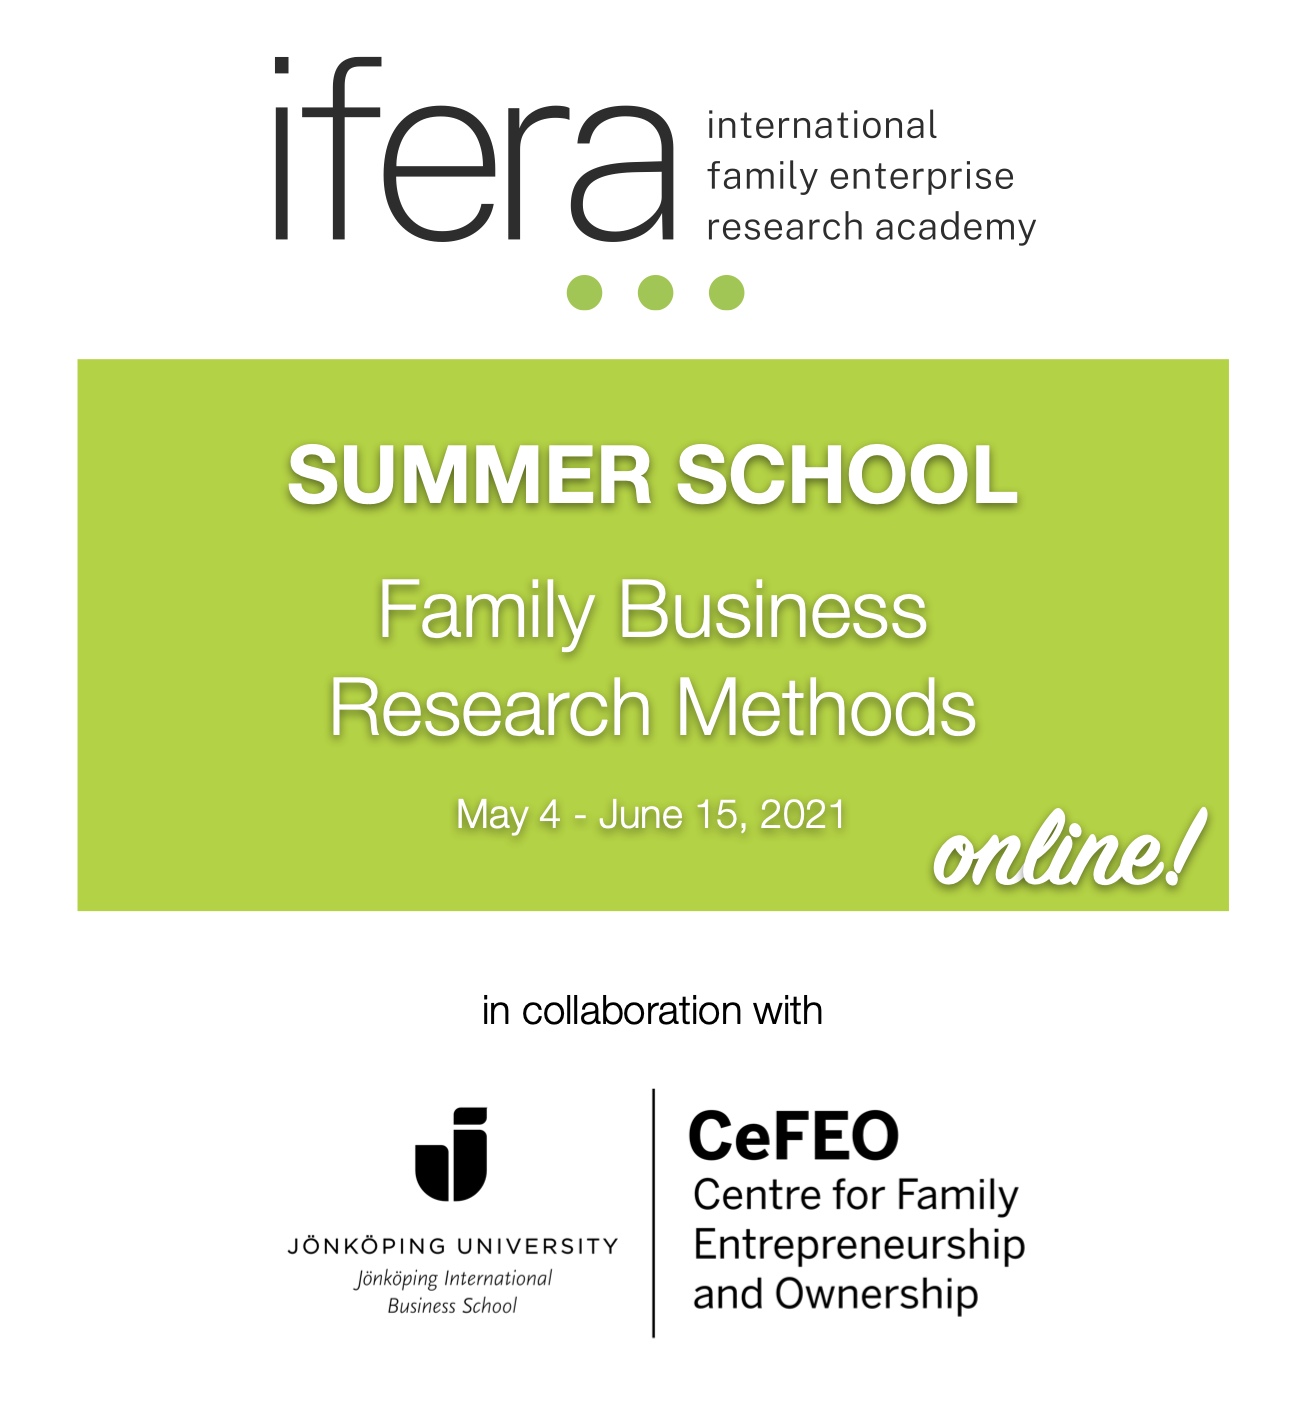 Text: Family business research methods - IFERA summer school 